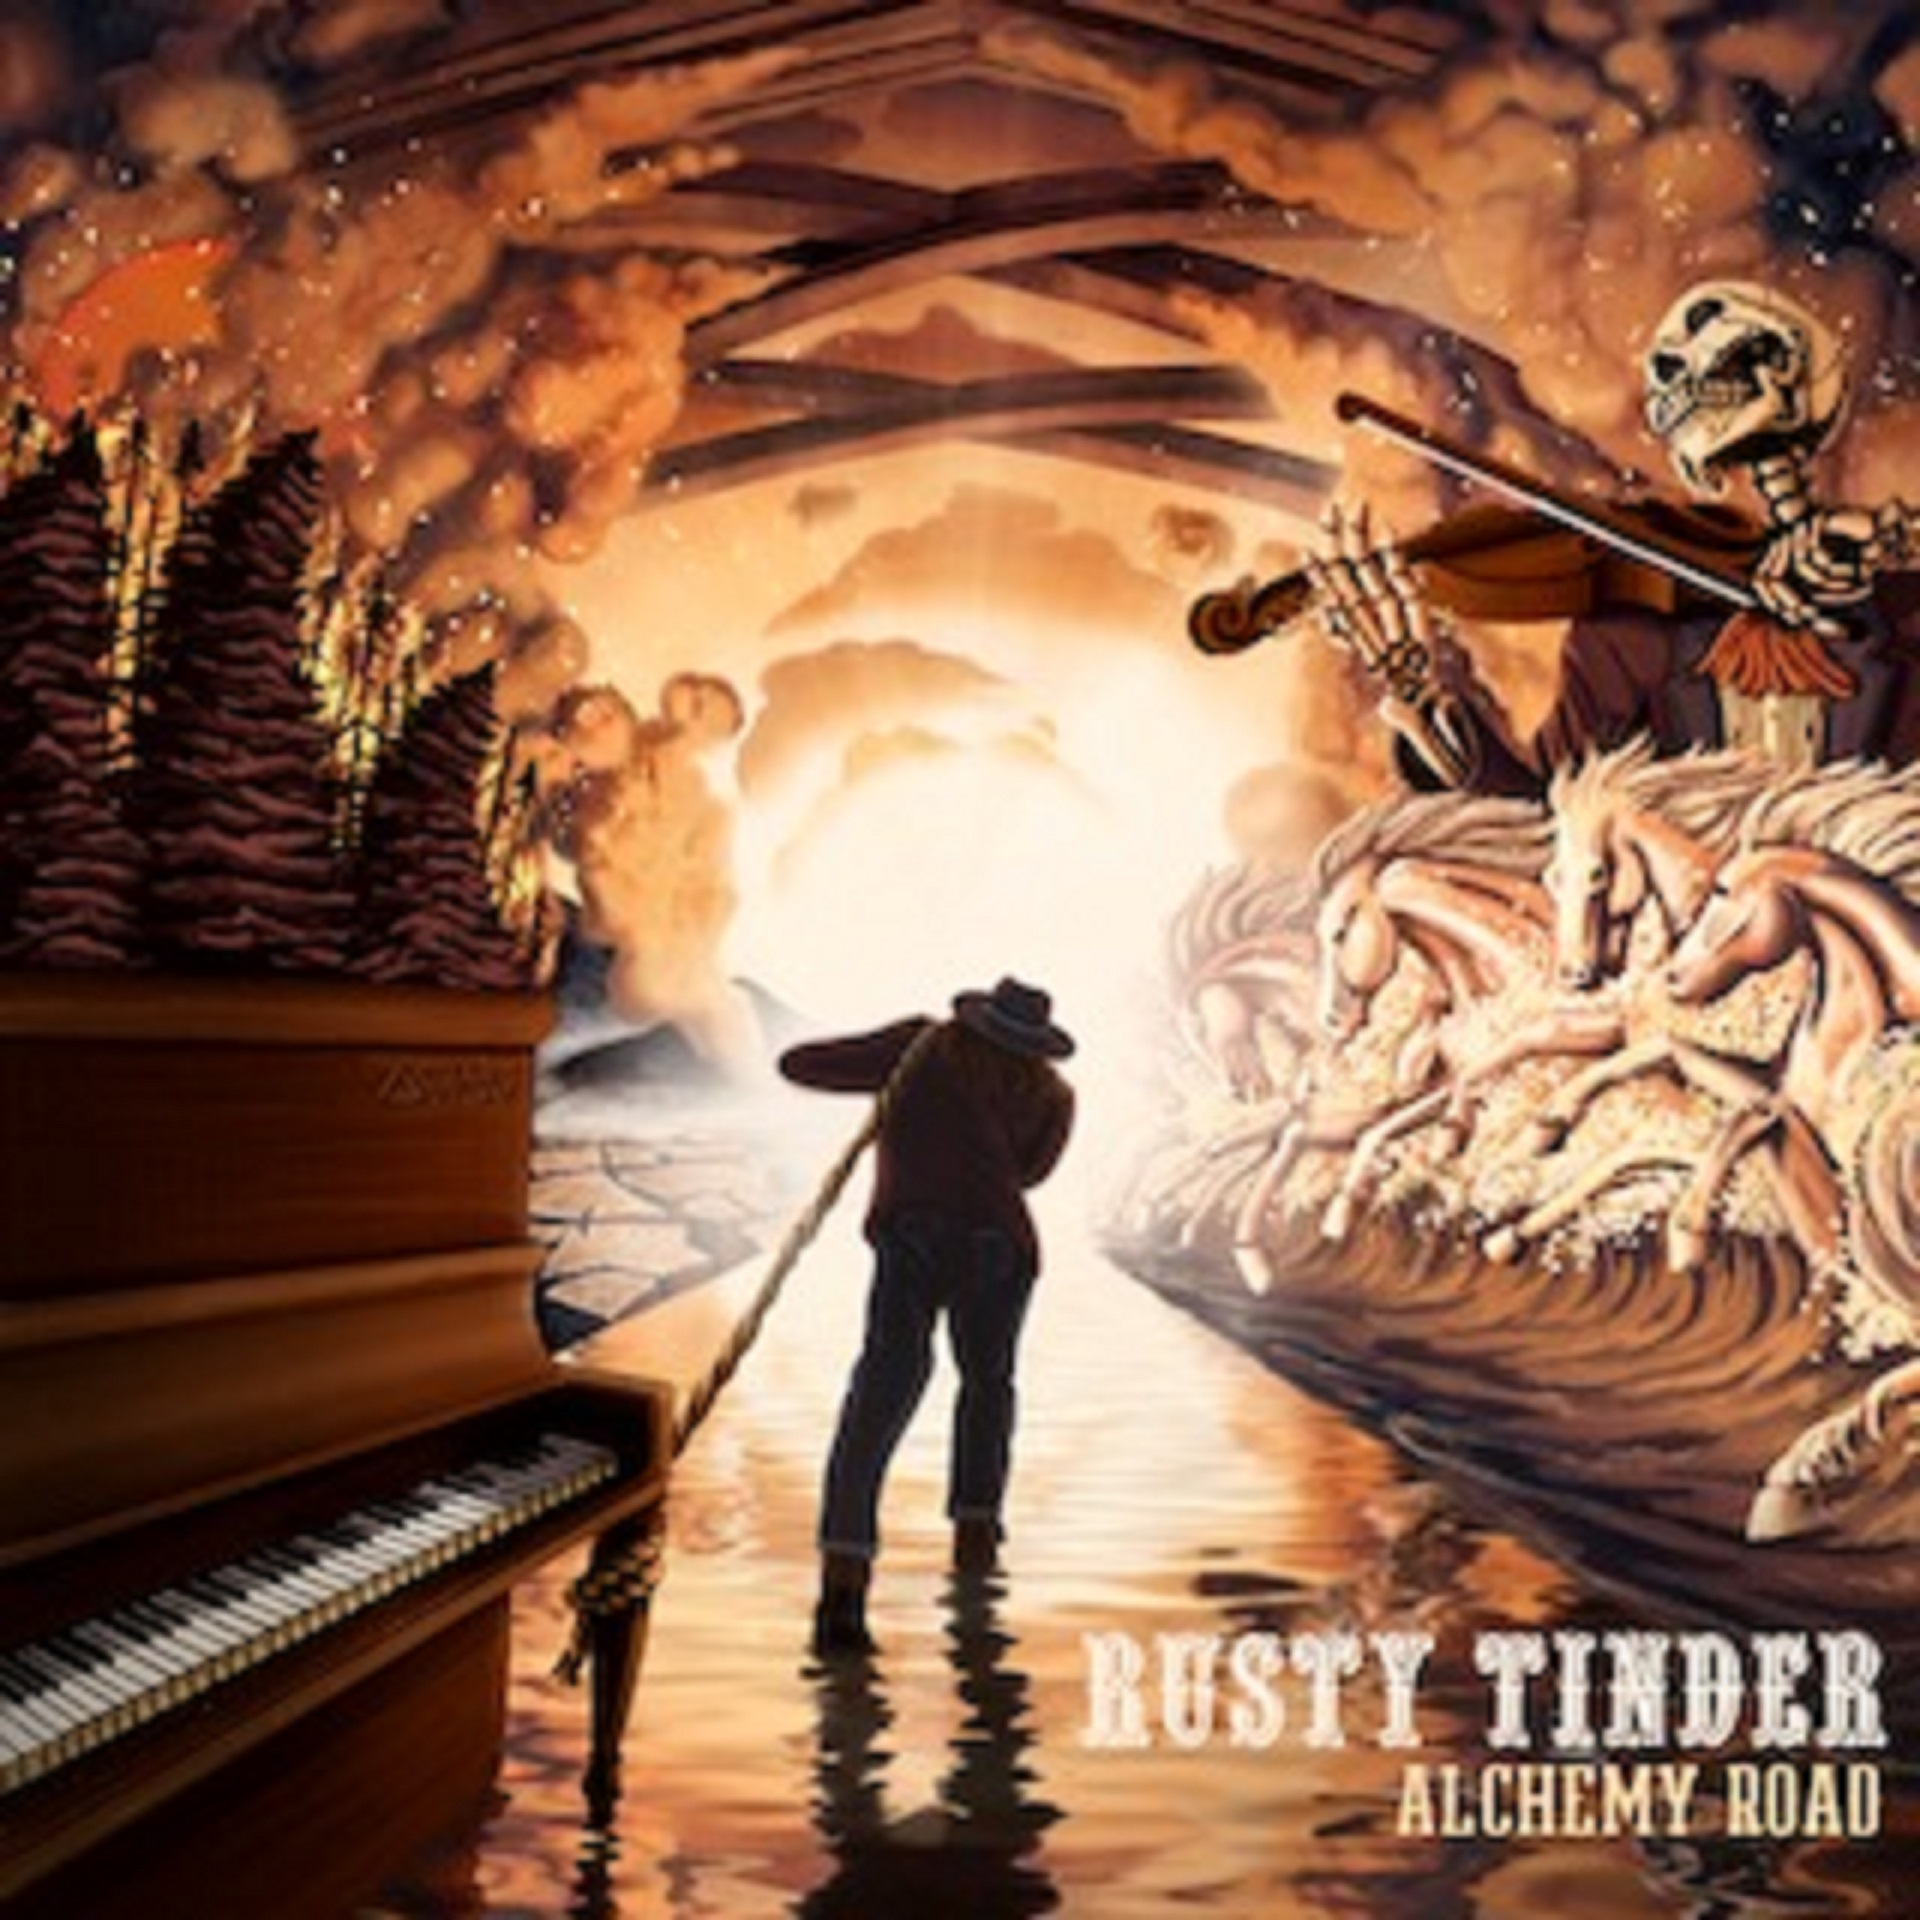 RUSTY TINDER RELEASES A SECOND SOLO ALBUM, ALCHEMY ROAD